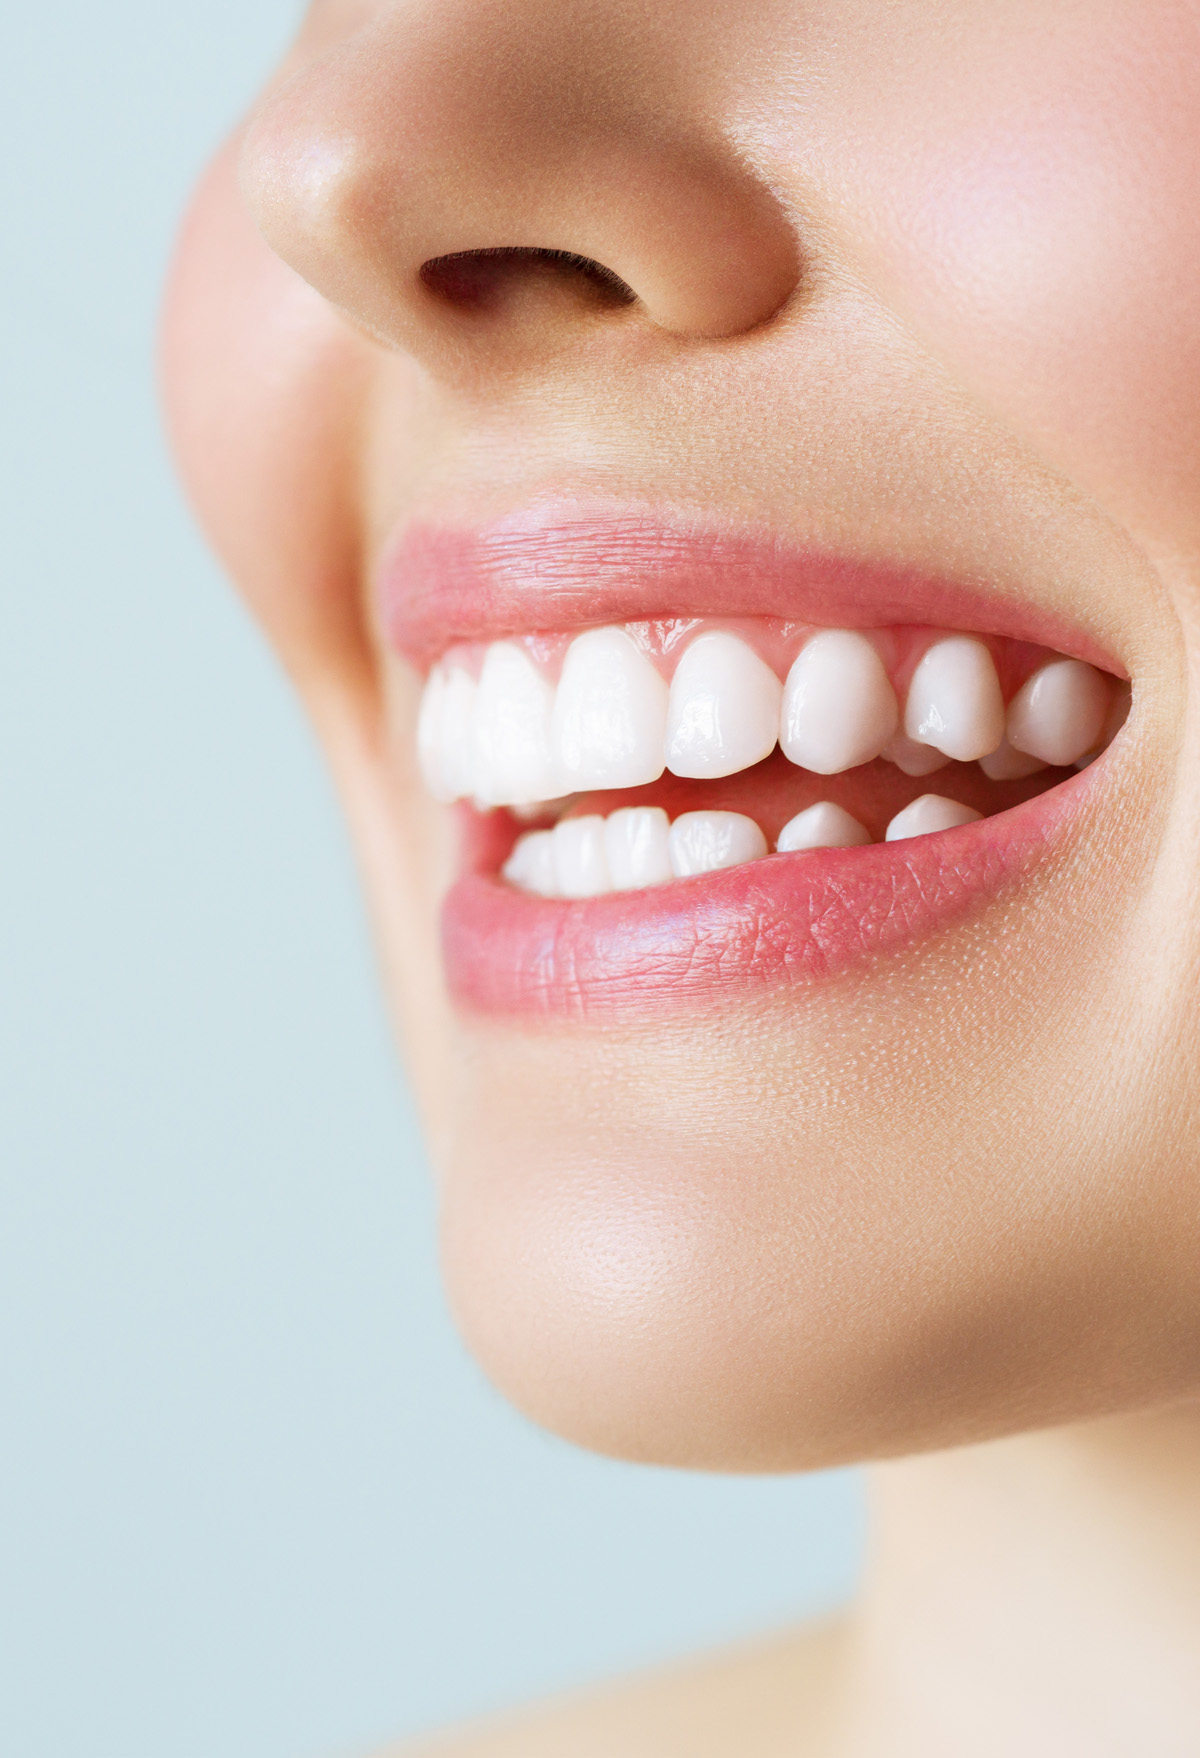 Image of perfect healthy teeth of a young women.